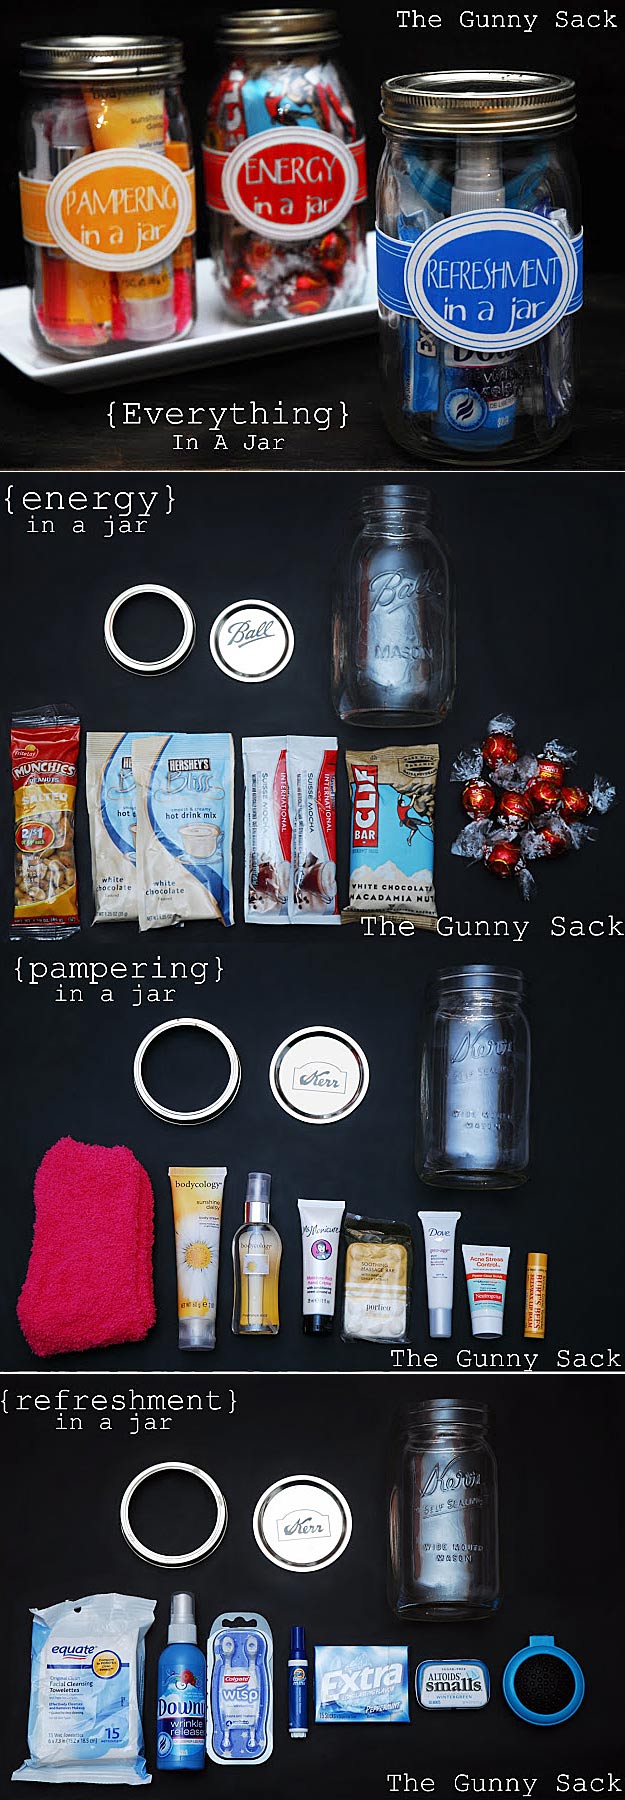 Homemade DIY Gifts in A Jar | Best Mason Jar Cookie Mixes and Recipes, Alcohol Mixers | Fun Gift Ideas for Men, Women, Teens, Kids, Teacher, Mom. Christmas, Holiday, Birthday and Easy Last Minute Gifts | Everything in a Jar Gift For Everyone 